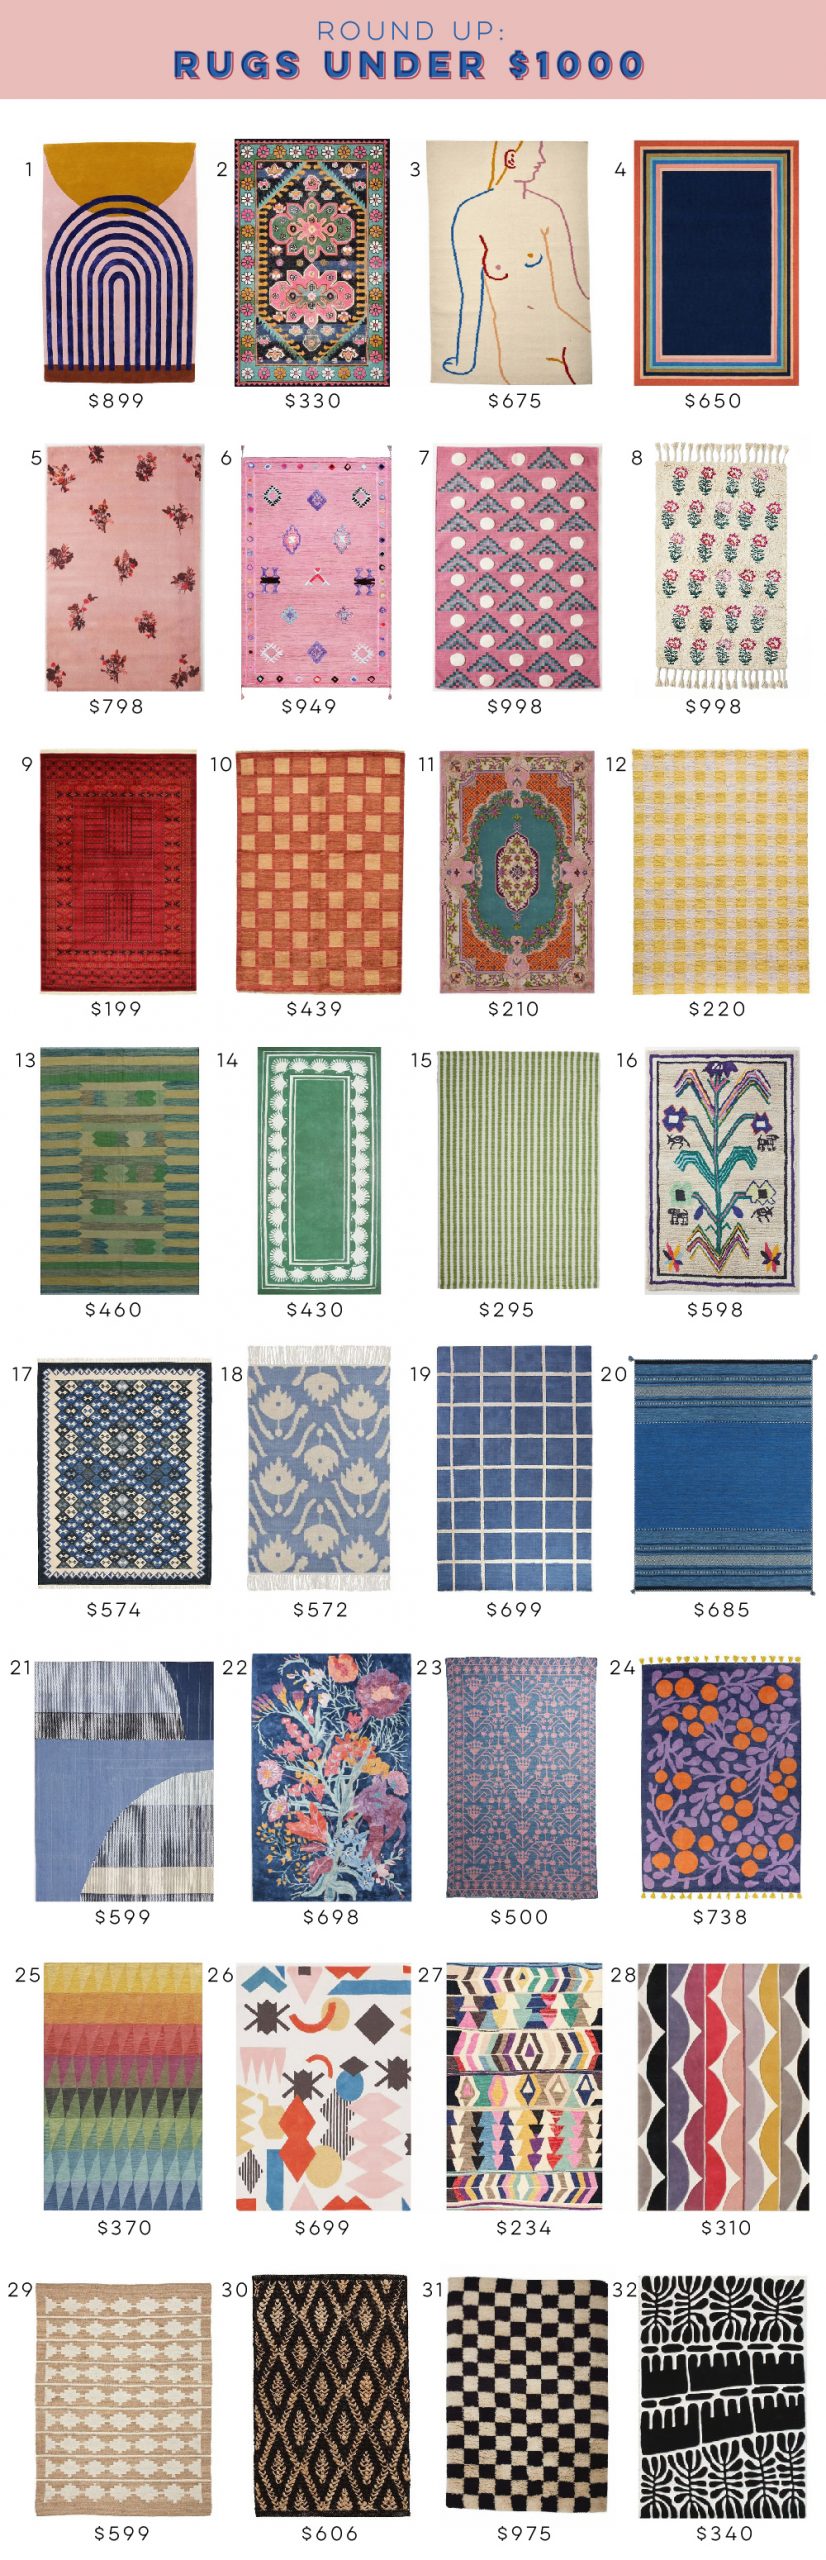 Affordable Rugs Under $1000